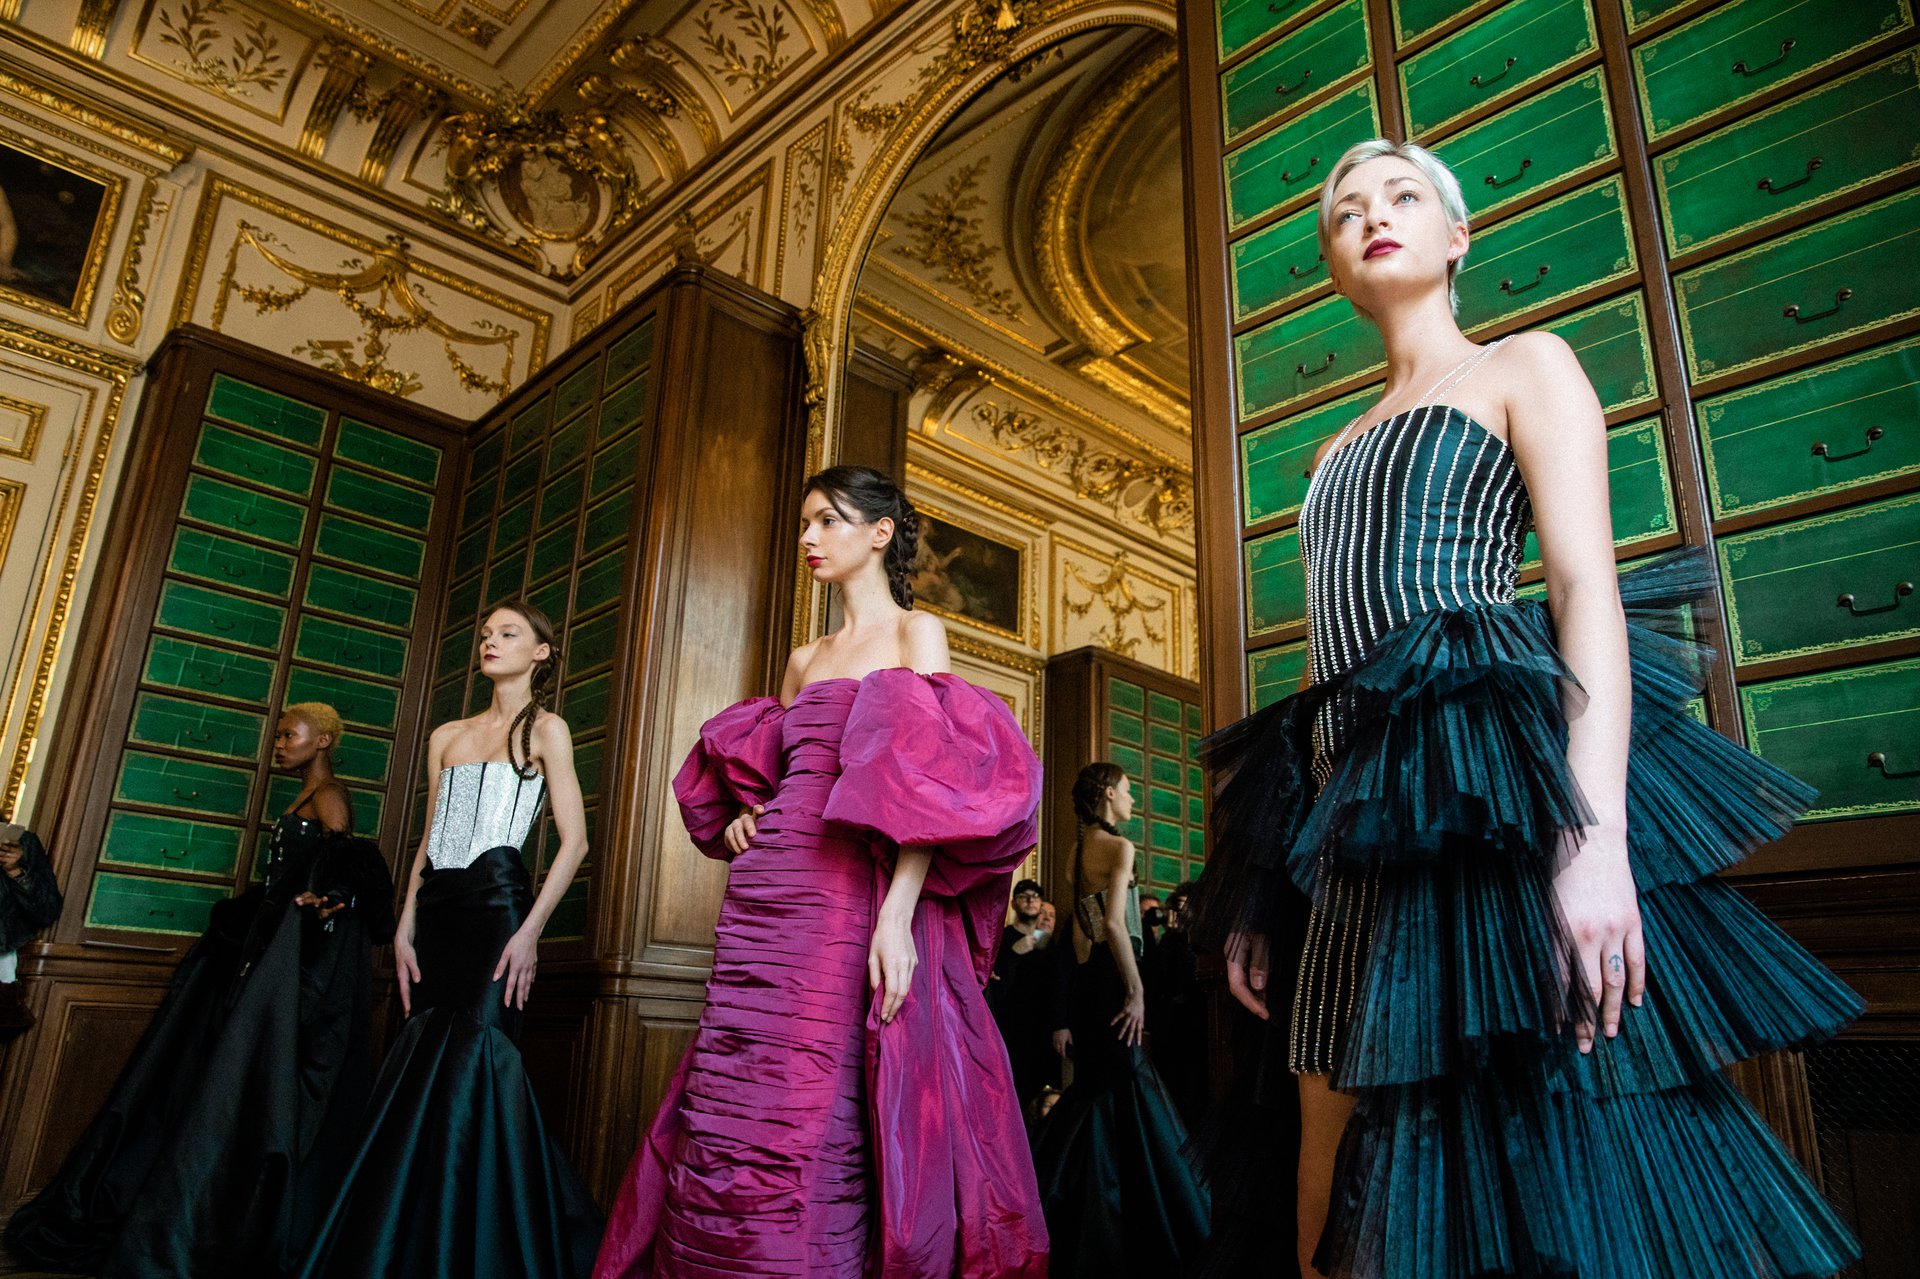 Four female fashion models wearing evening dresses in an ornate room.